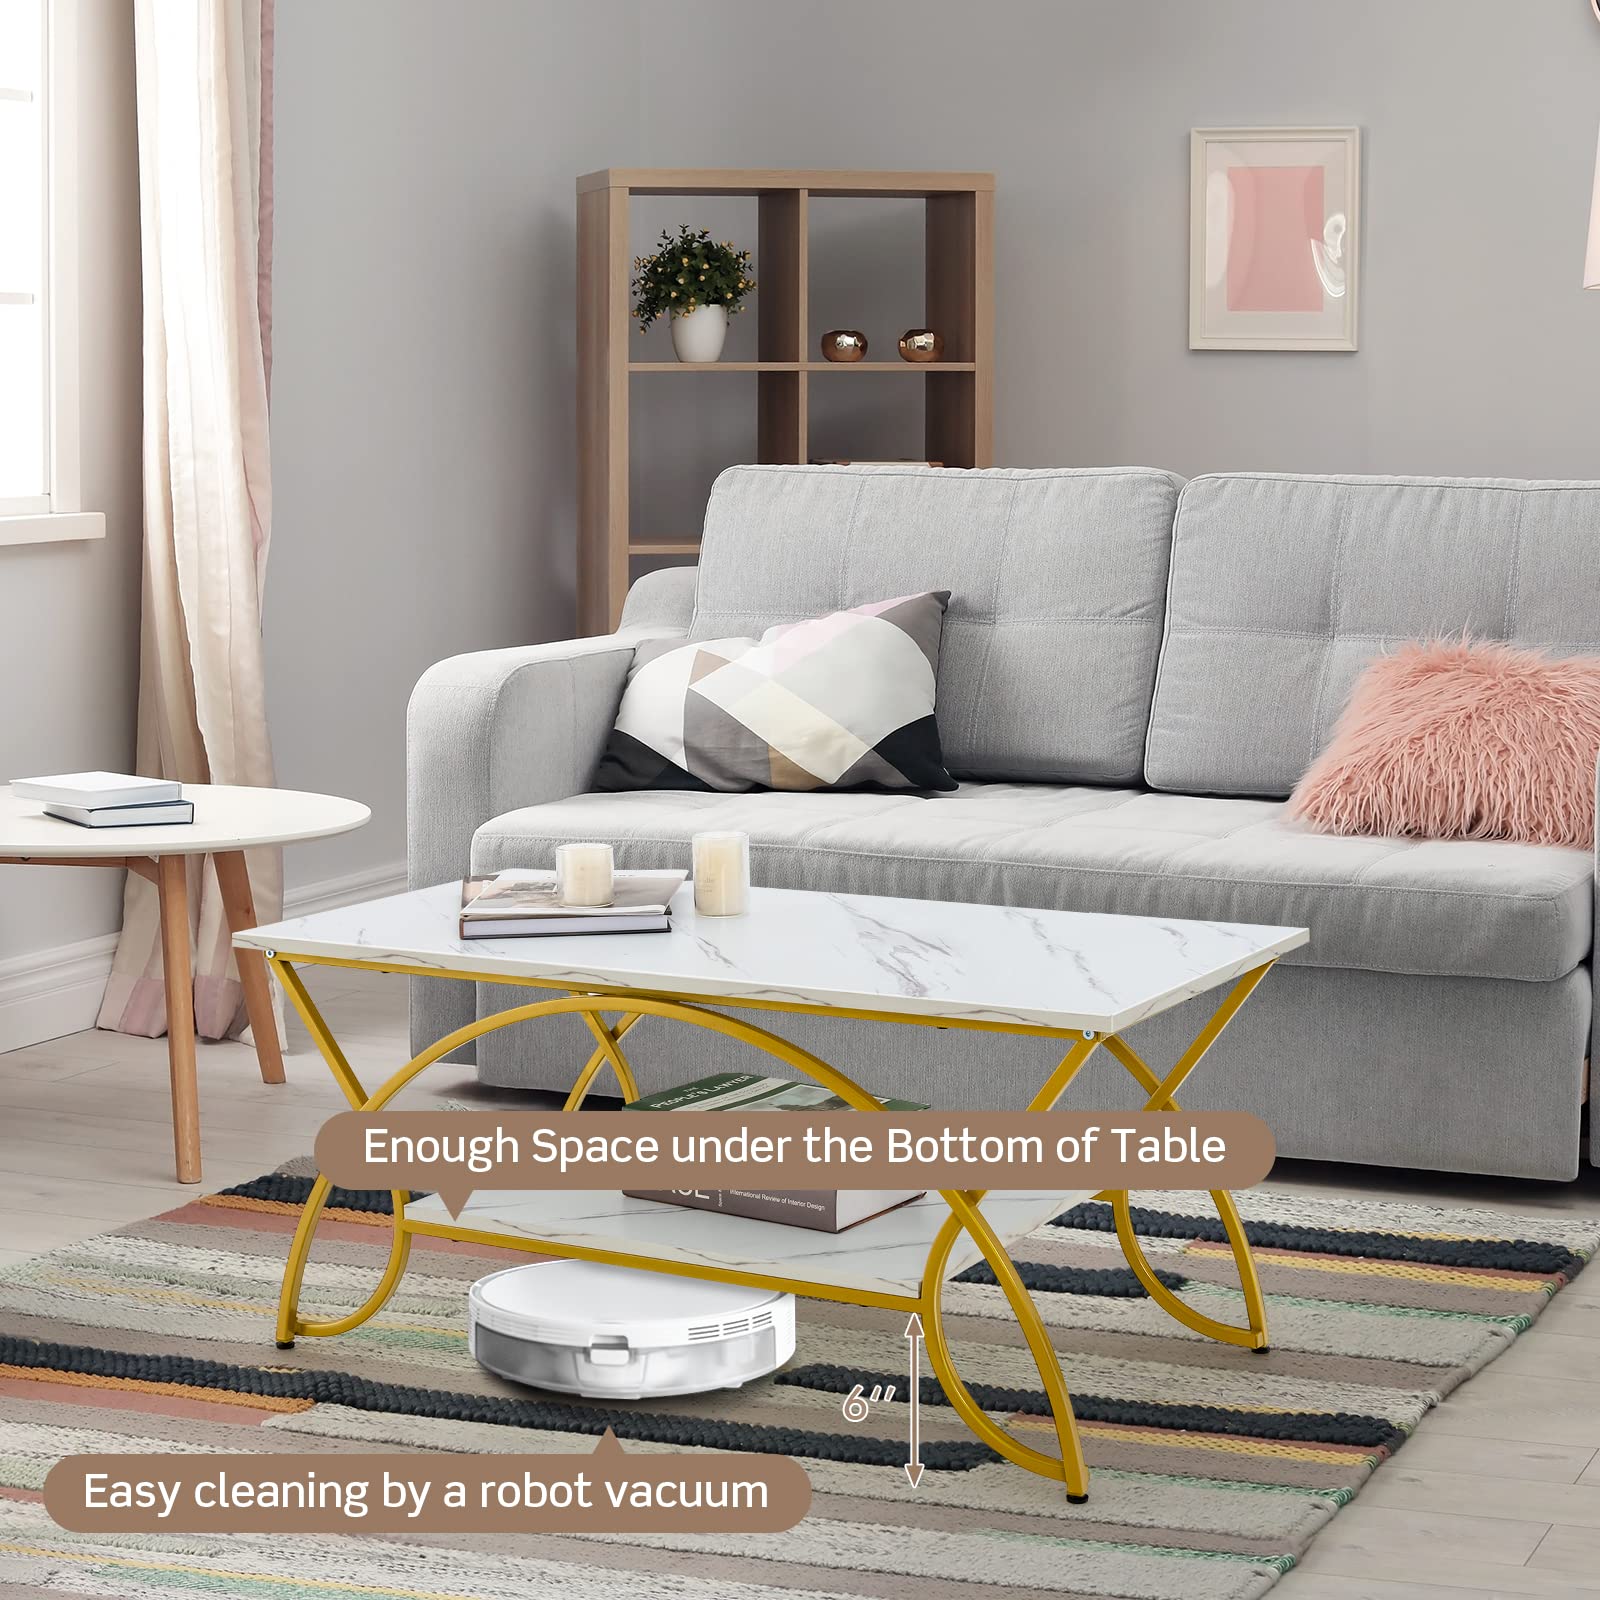 Giantex 2-Tier Rectangular Coffee Table, Modern Chic Cocktail Table with Open Storage Shelf, White/Gold